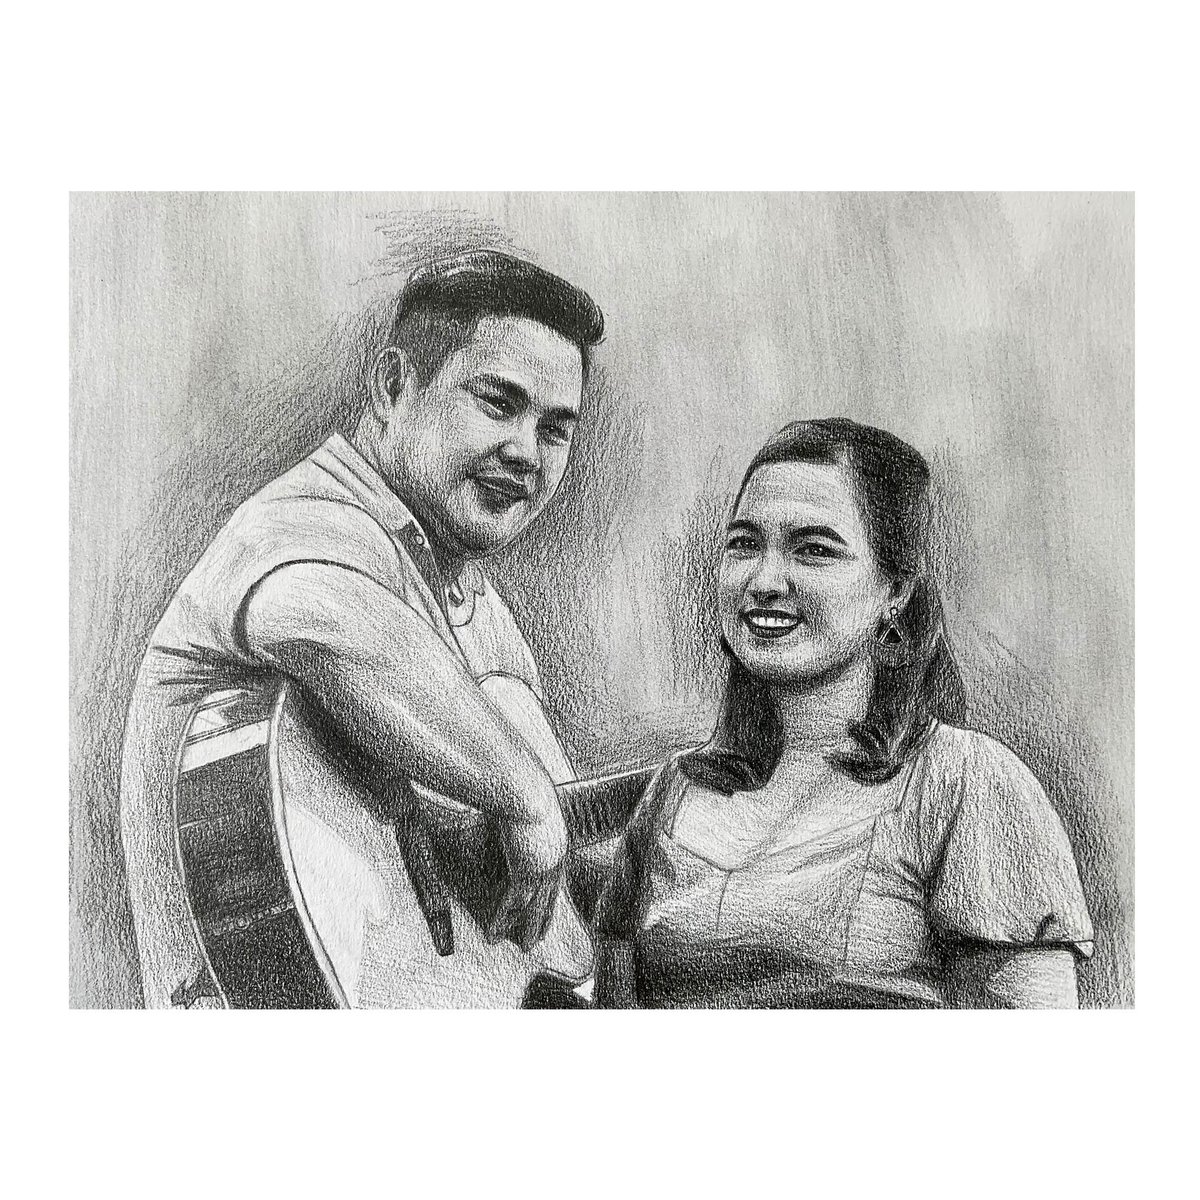 Commissioned Portraits
8.25x11.75inches
Graphite on Paper
2023
Commission are open
Limited slots are available
#art #artph #artoftheday #filipinoportrait #giftidea #pencilartists #portraitartist #pencil #couples #Familyportrait #pencildrawing #portrait #portraitdrawing